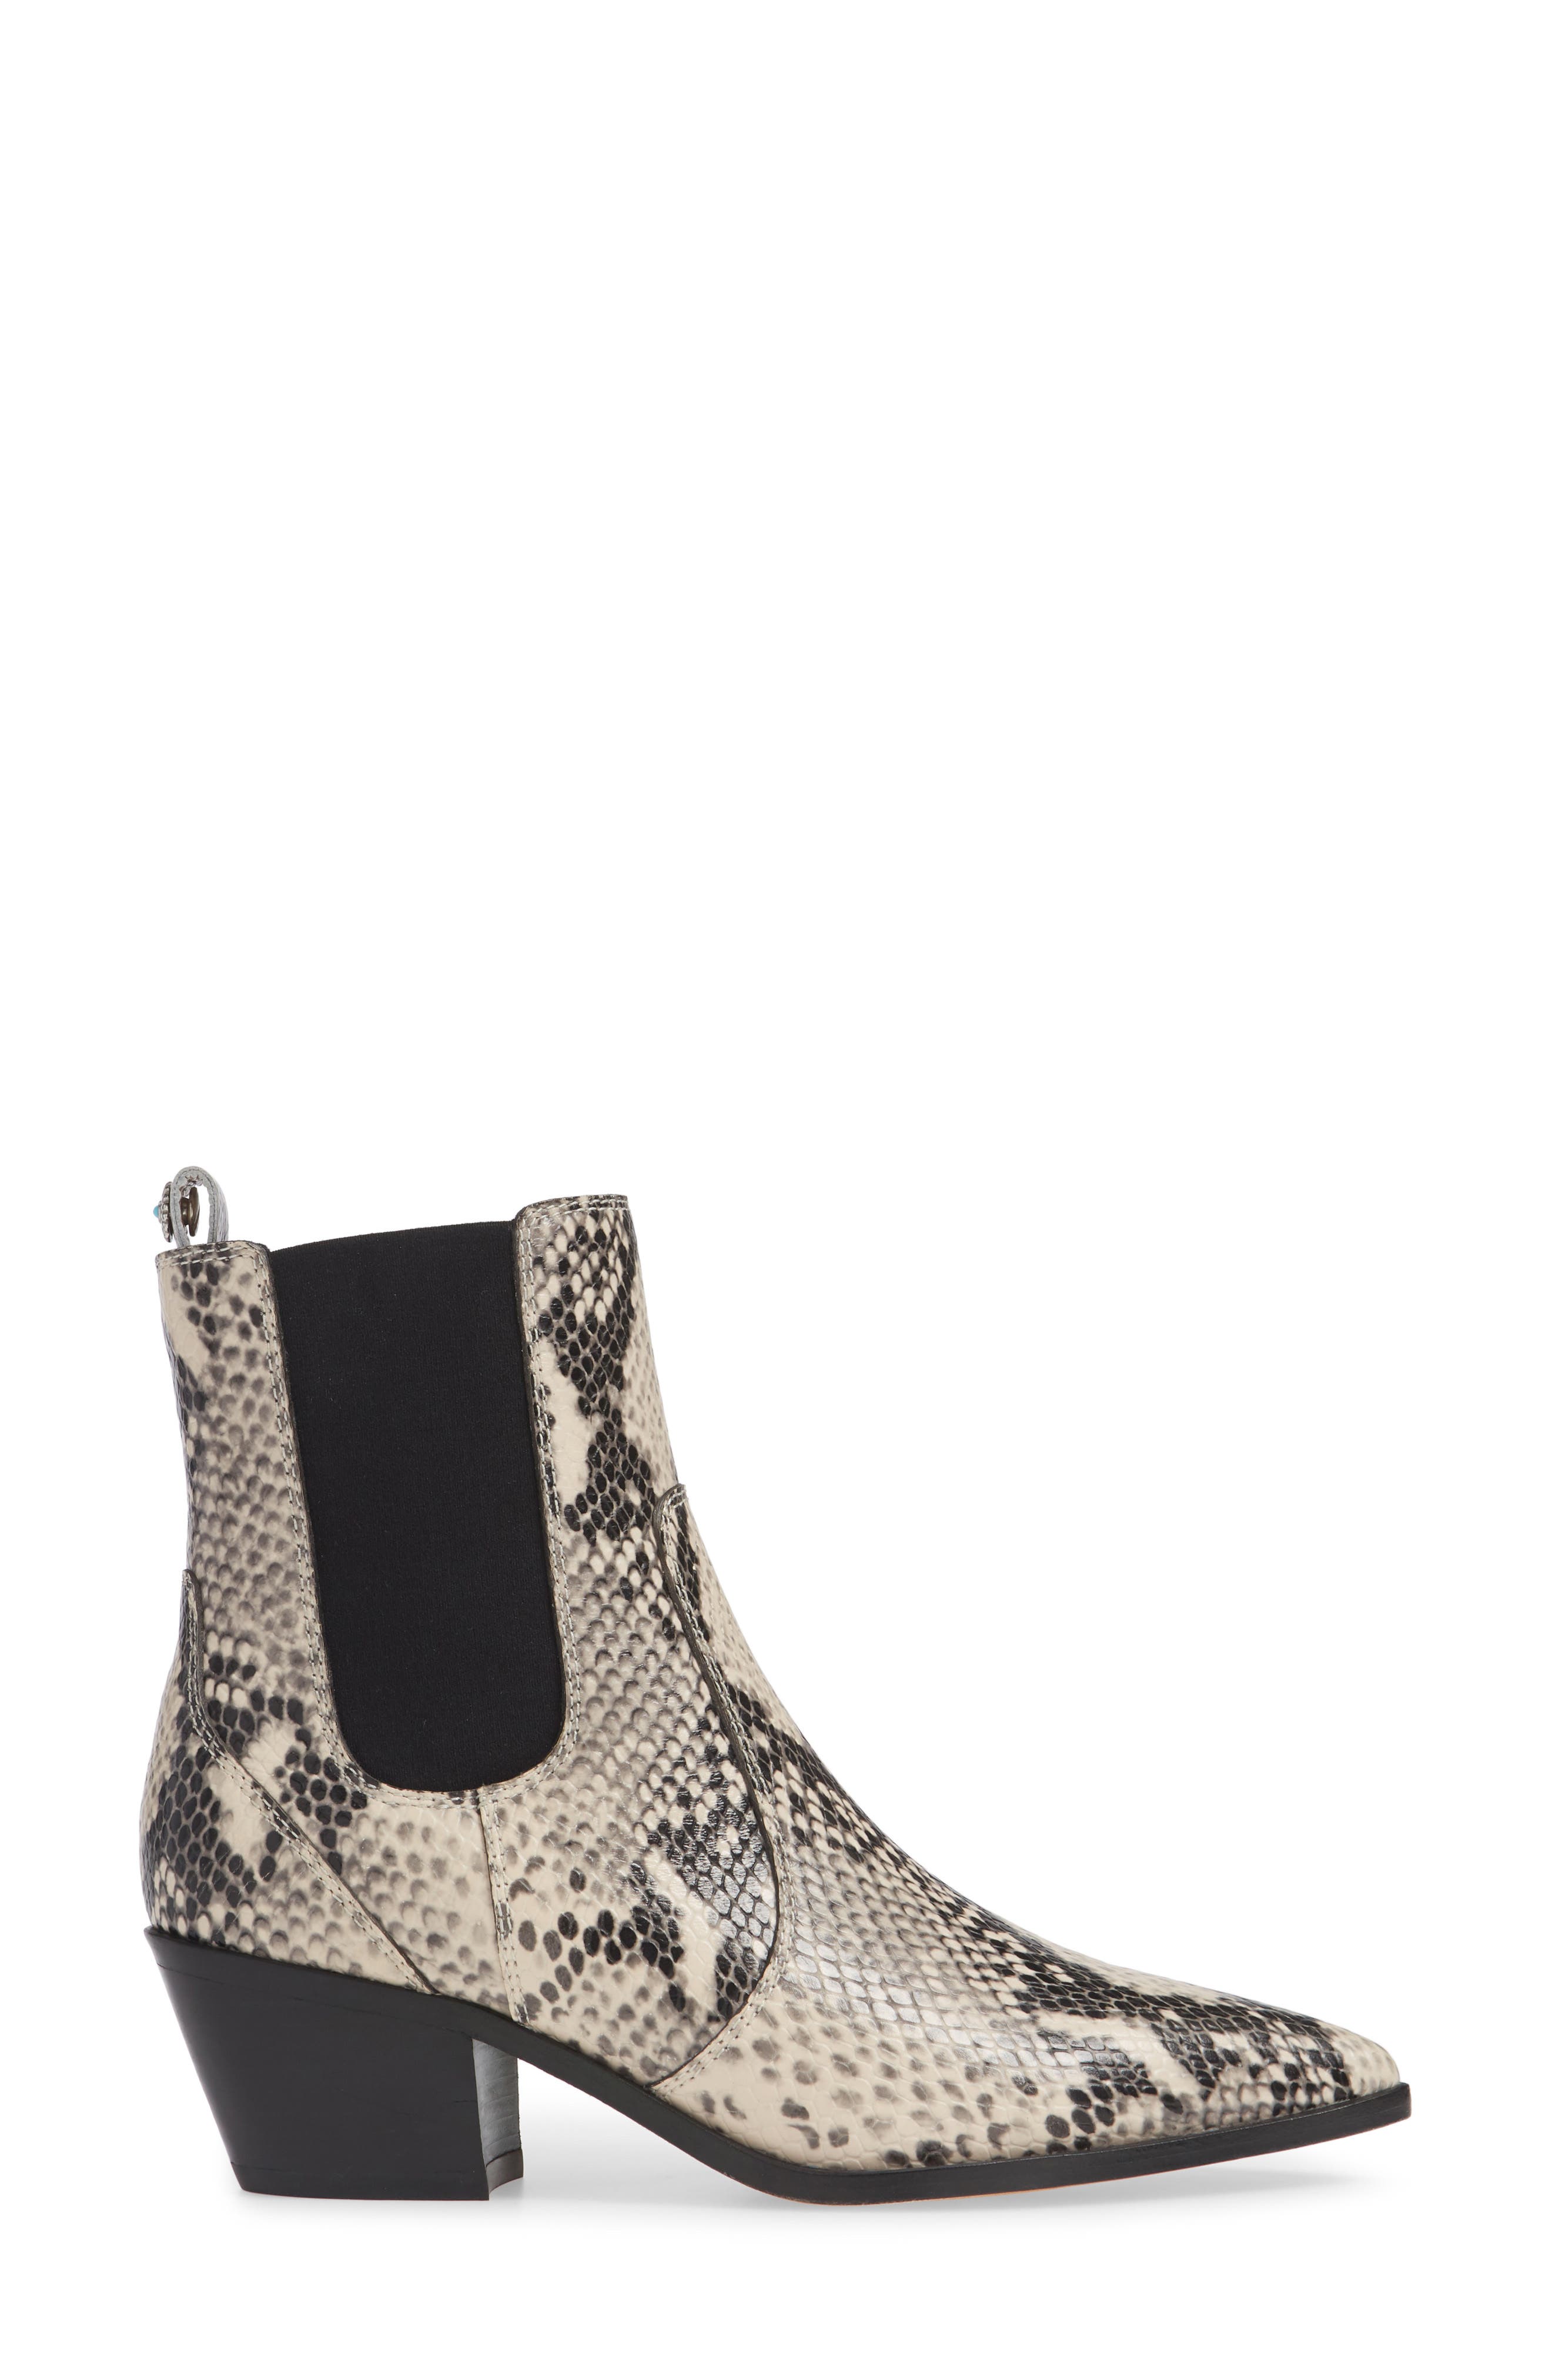 paige snake boots